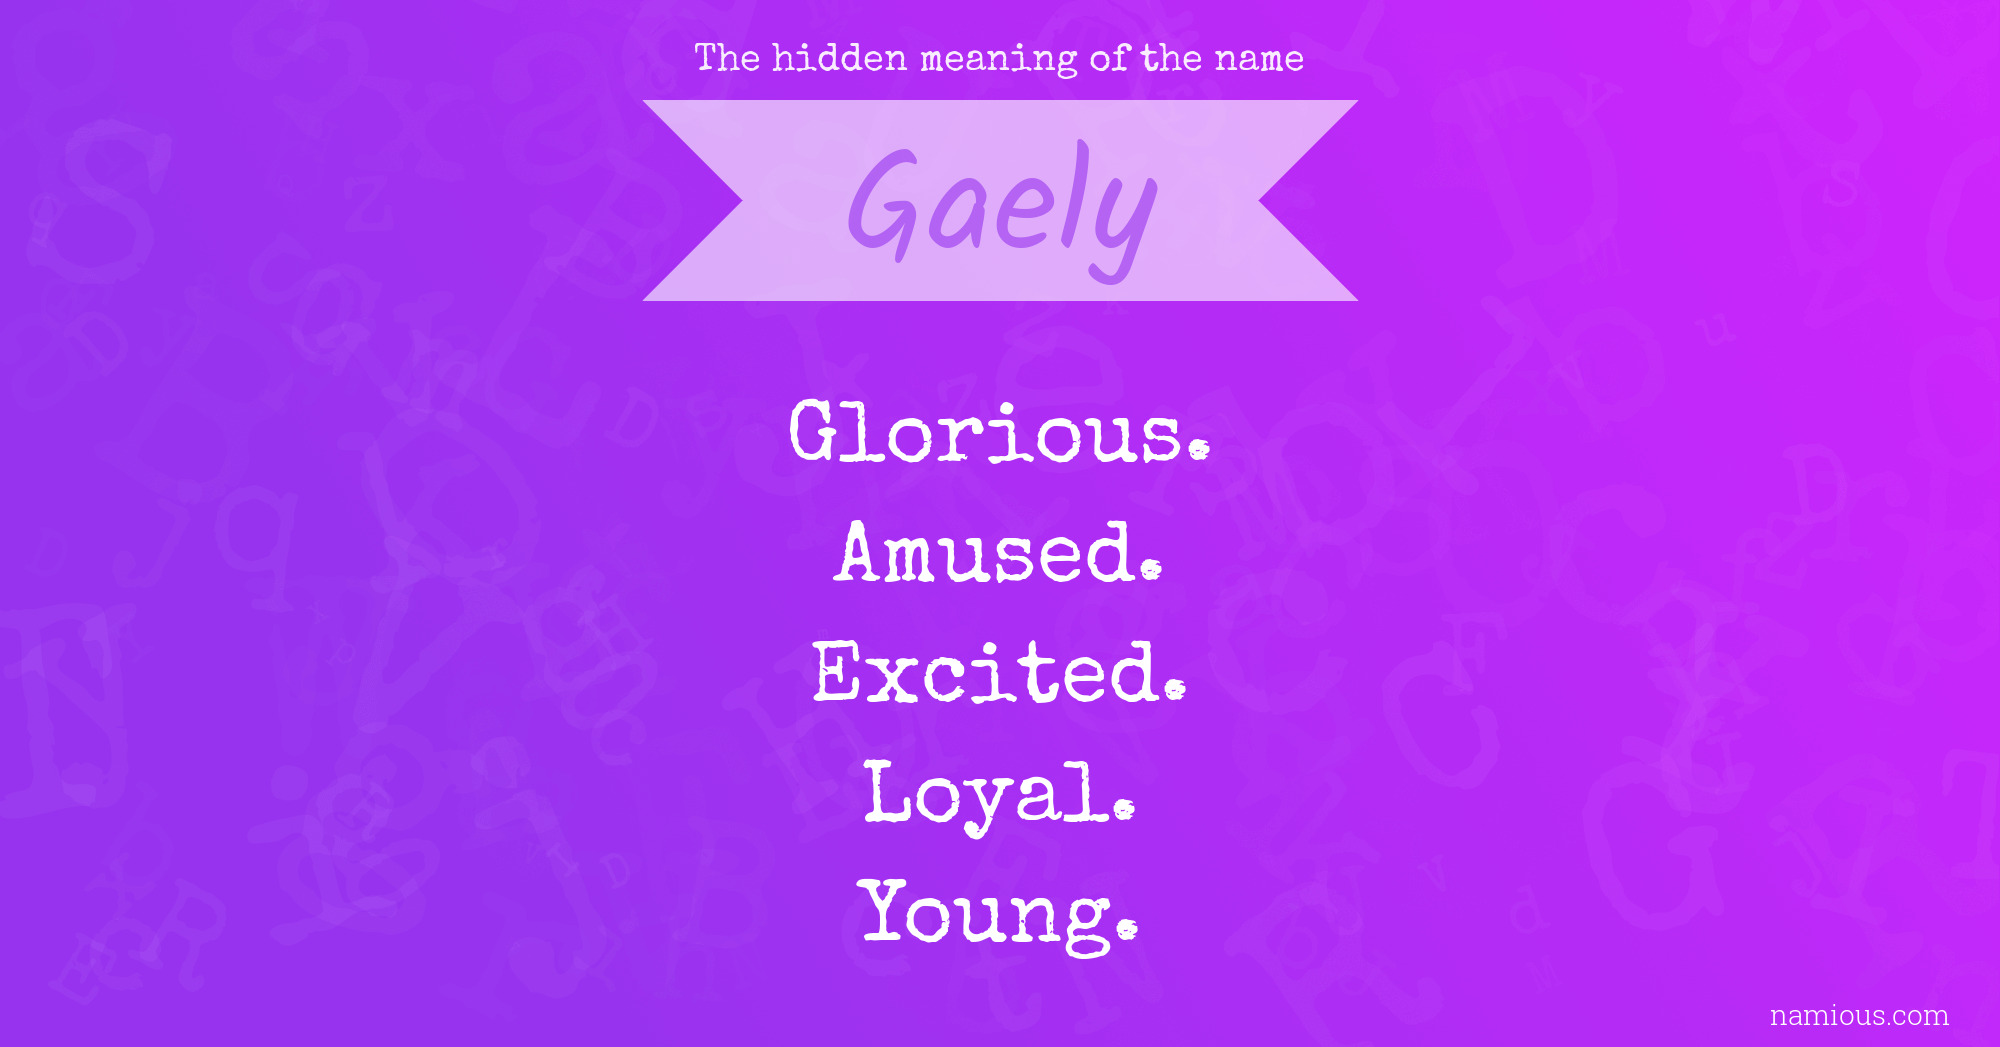 The hidden meaning of the name Gaely